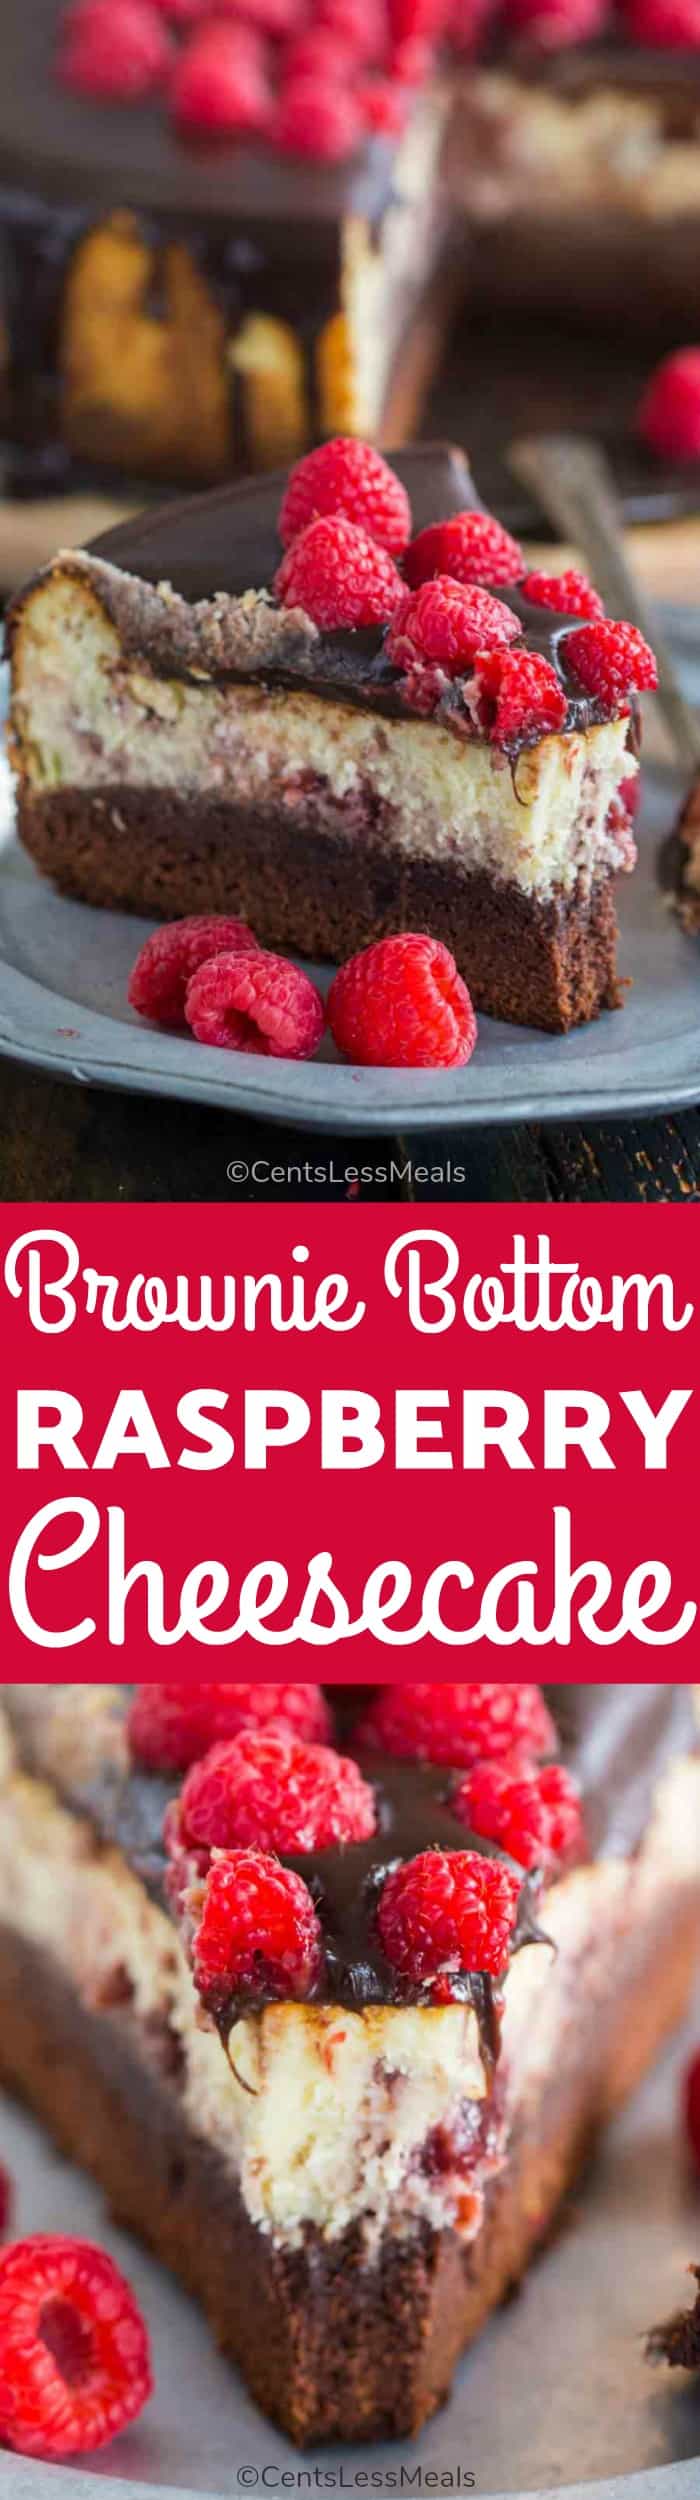 Brownie Bottom Raspberry Cheesecake with a title